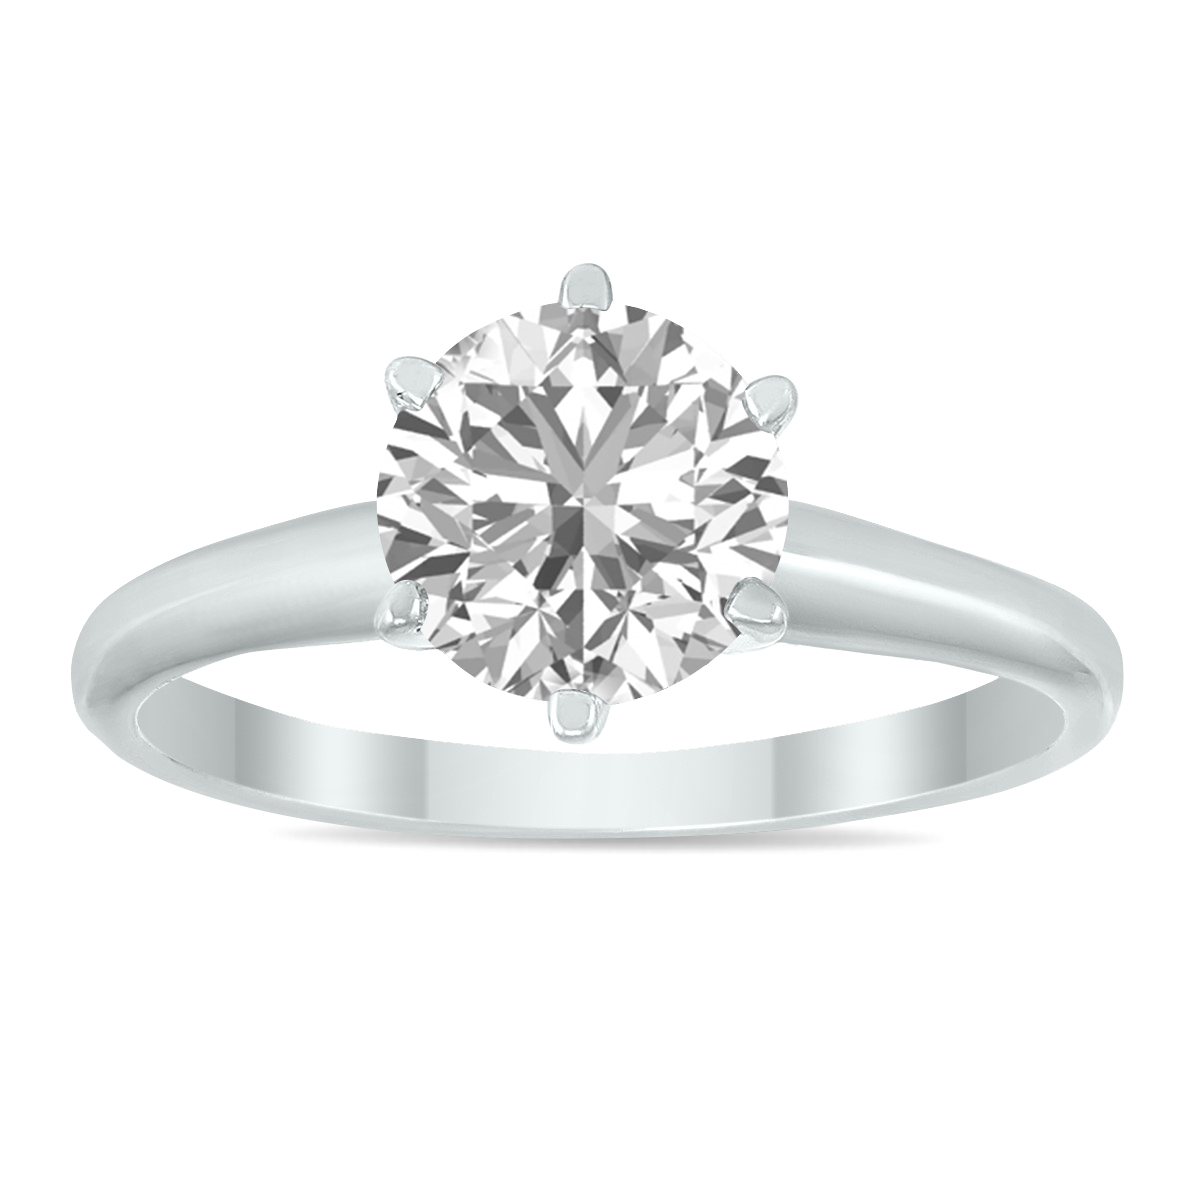 Image of IGI Certified Lab Grown 1 1/10 Carat Diamond Solitaire Ring in 14K White Gold (J Color SI1 Clarity)